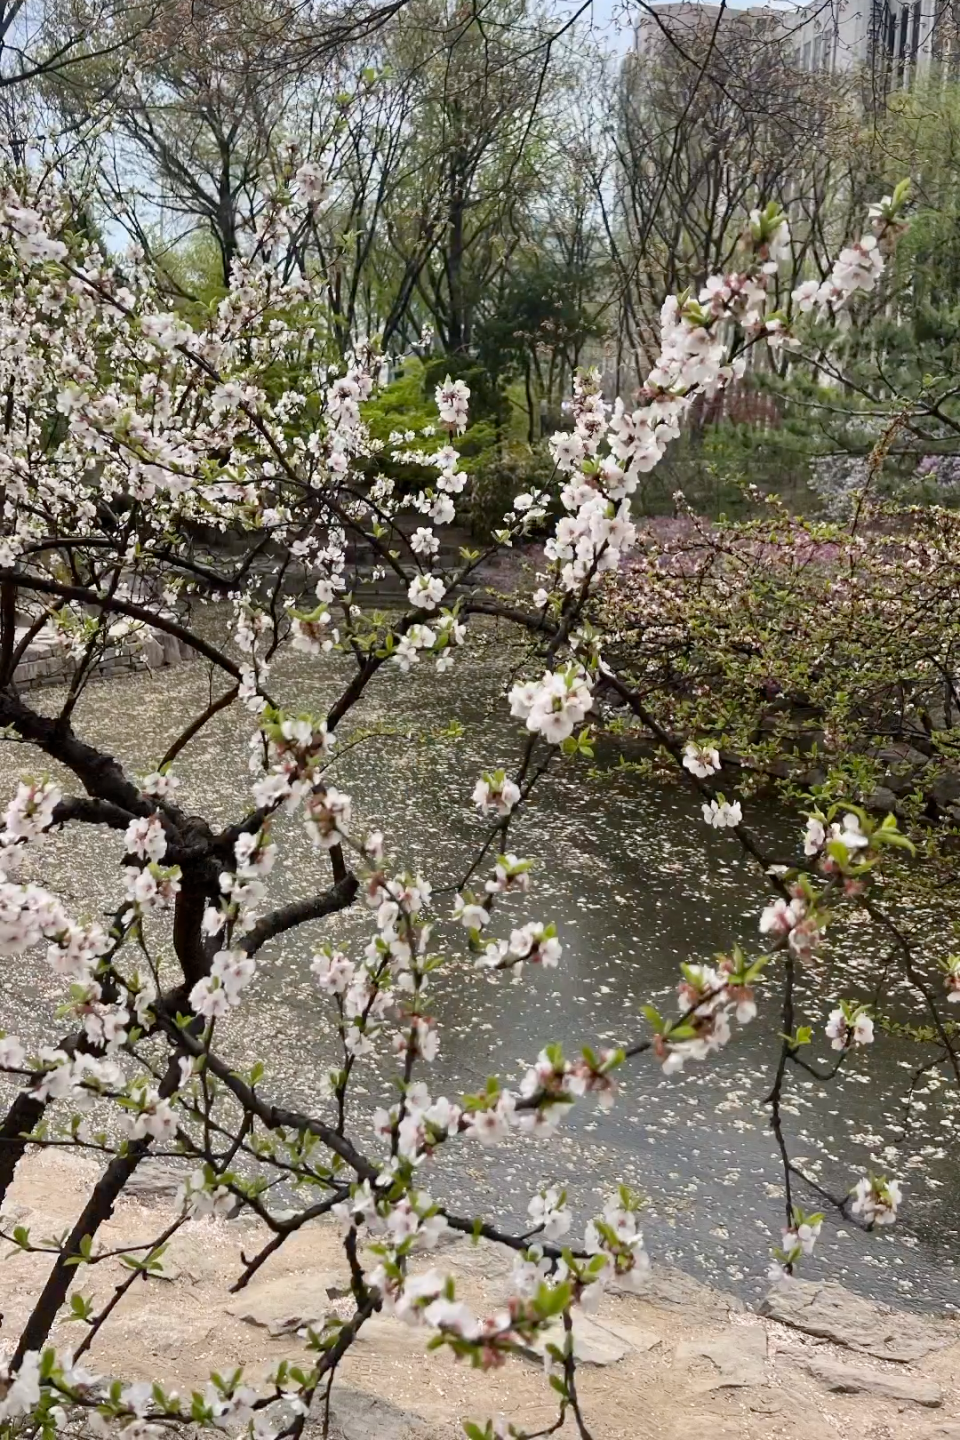 One of the trip's many highlights, said Joanna Gaines, was seeing Seoul's famous cherry blossom trees. (Joanna Gaines via Instagram)